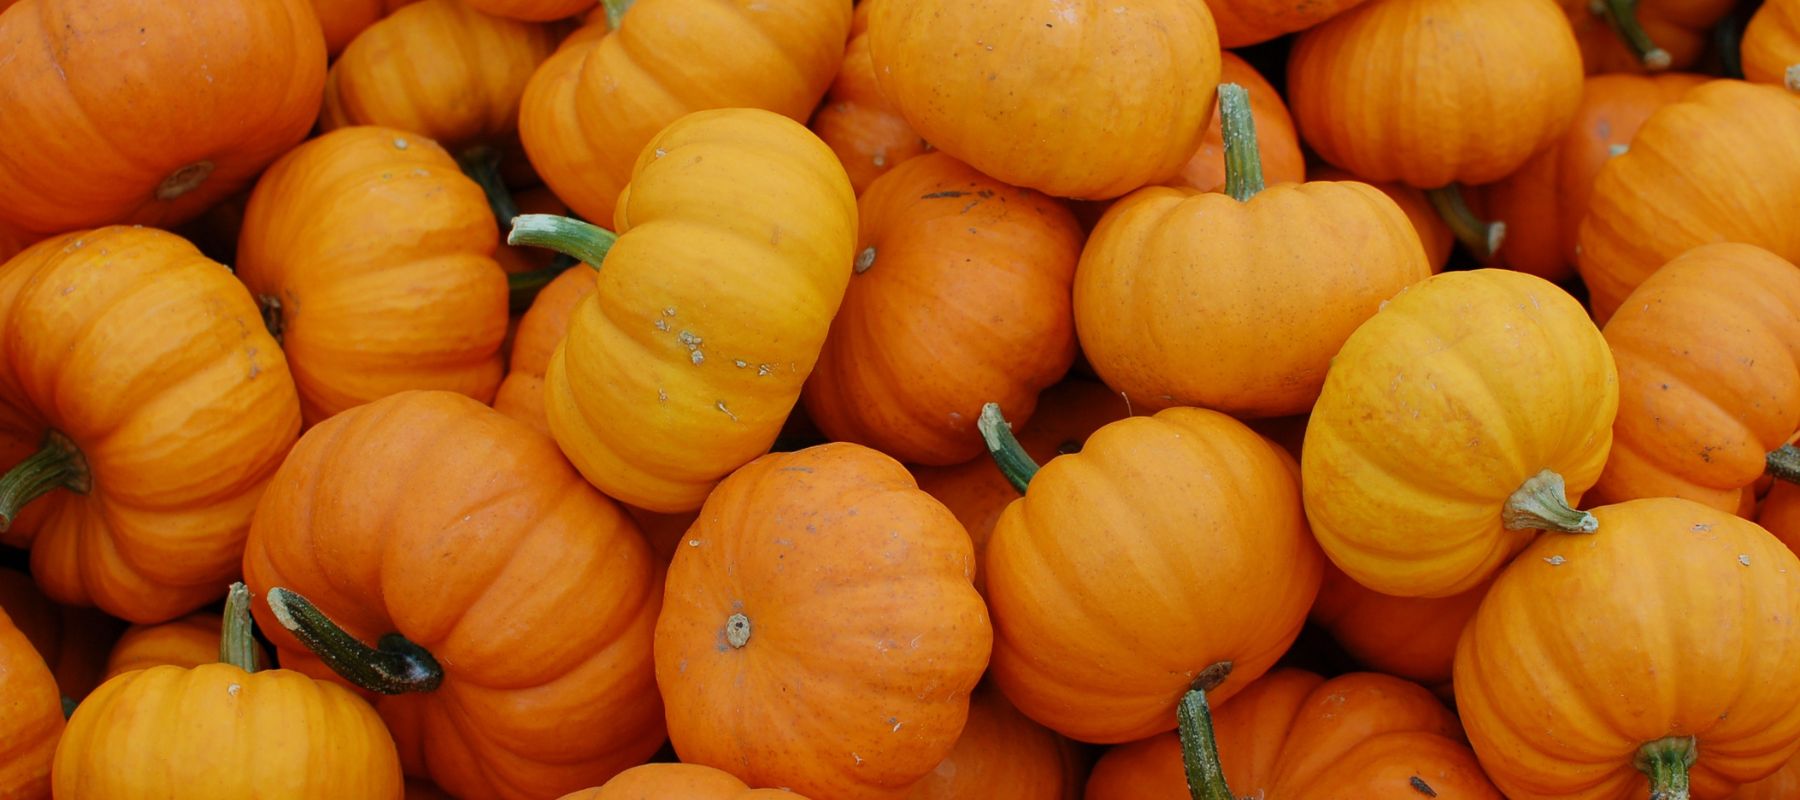 Plant your pumpkins by Halloween